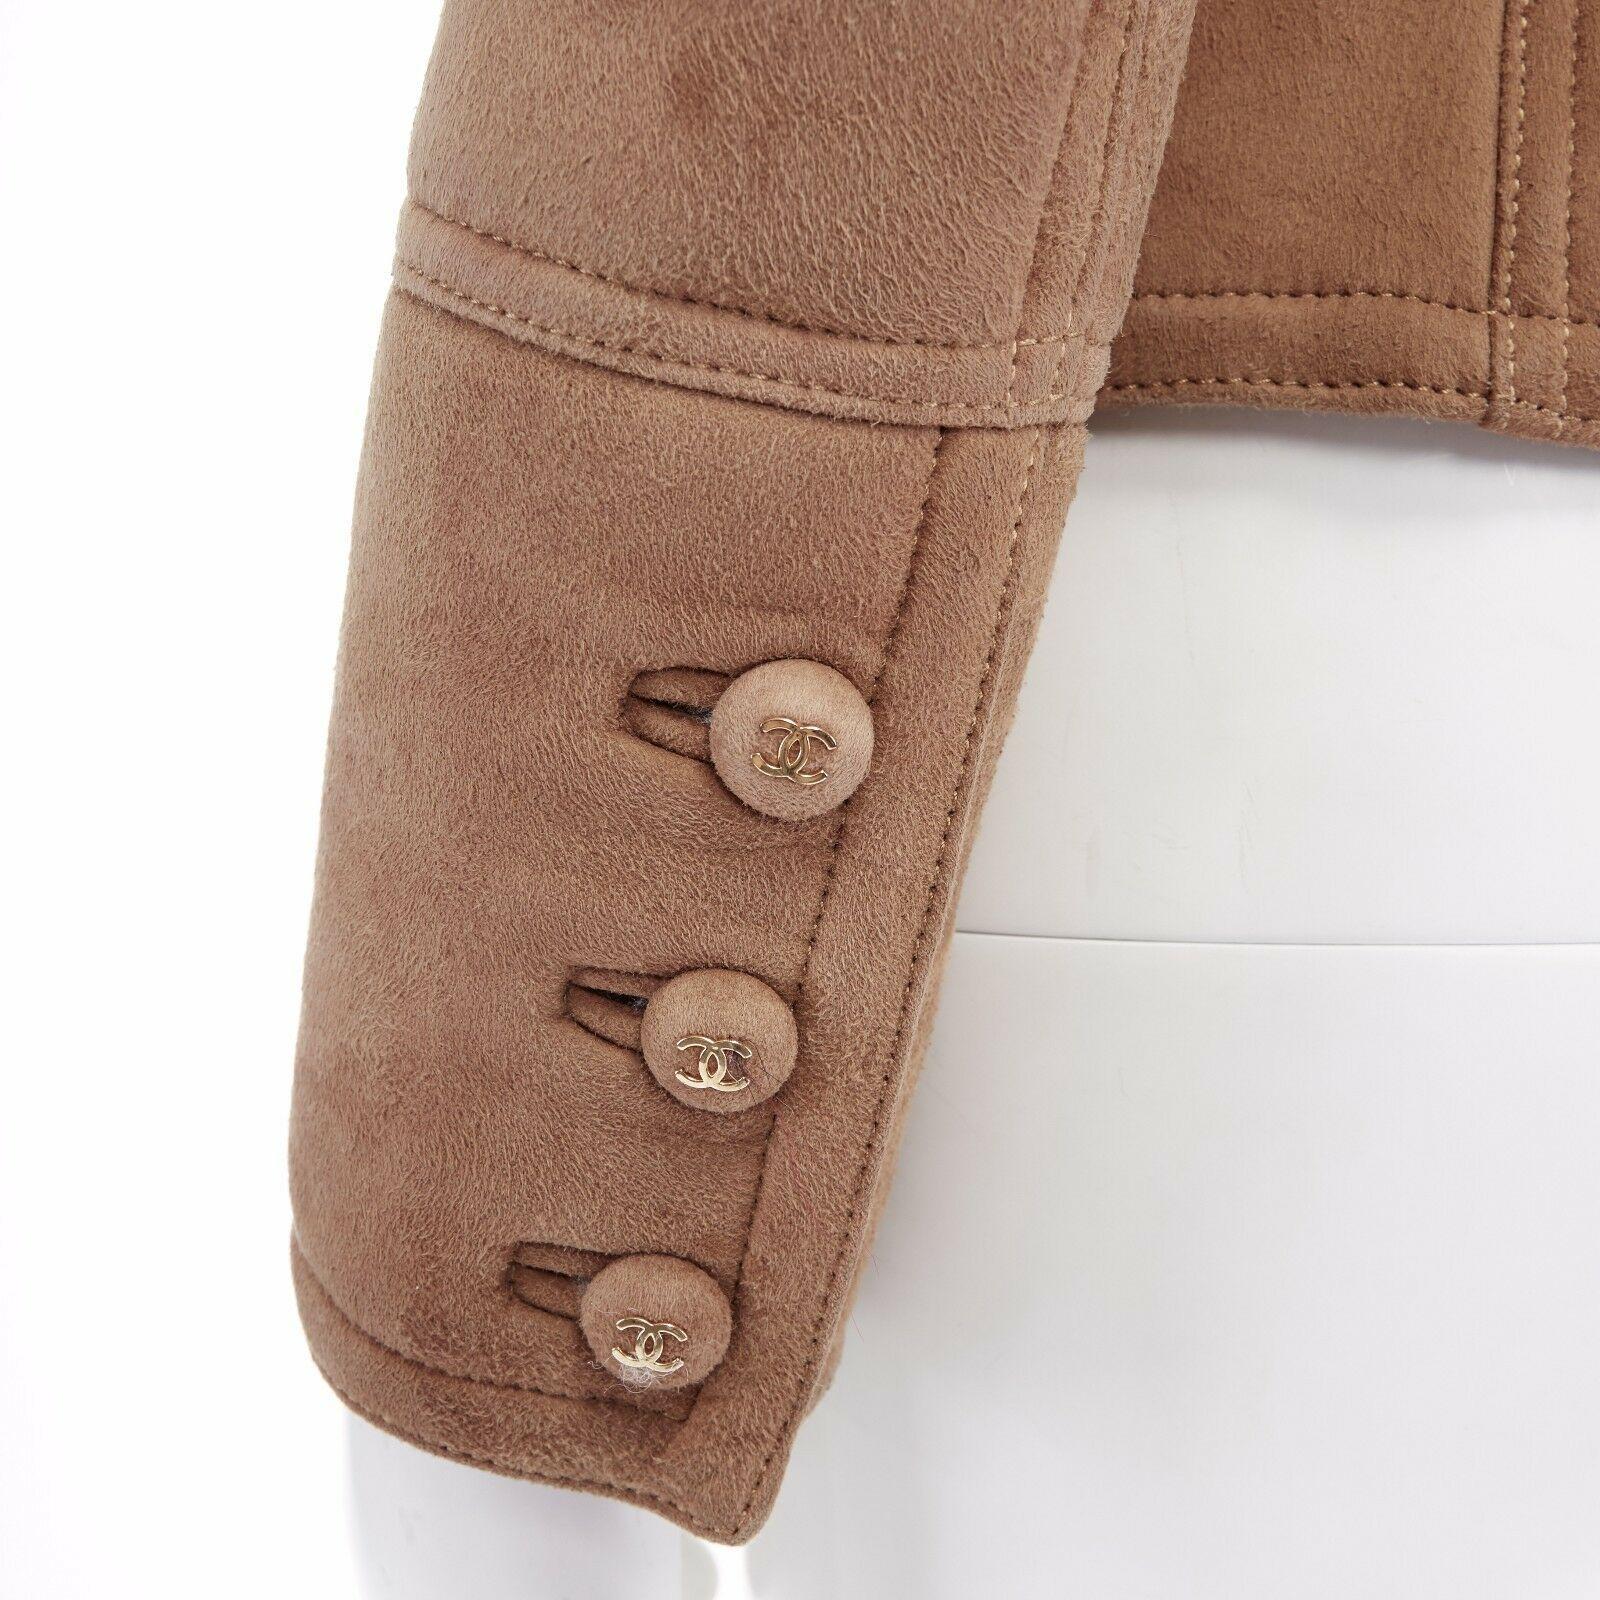 CHANEL Vintage 96A brown suede shearling lined cropped aviator jacket FR38 US4 S

CHANEL
FROM THE FALL WINTER 1996 COLLECTION
Light brown suede leather outer . Cream shearling lining . Spread collar with shearling trimming . Zip front closure with